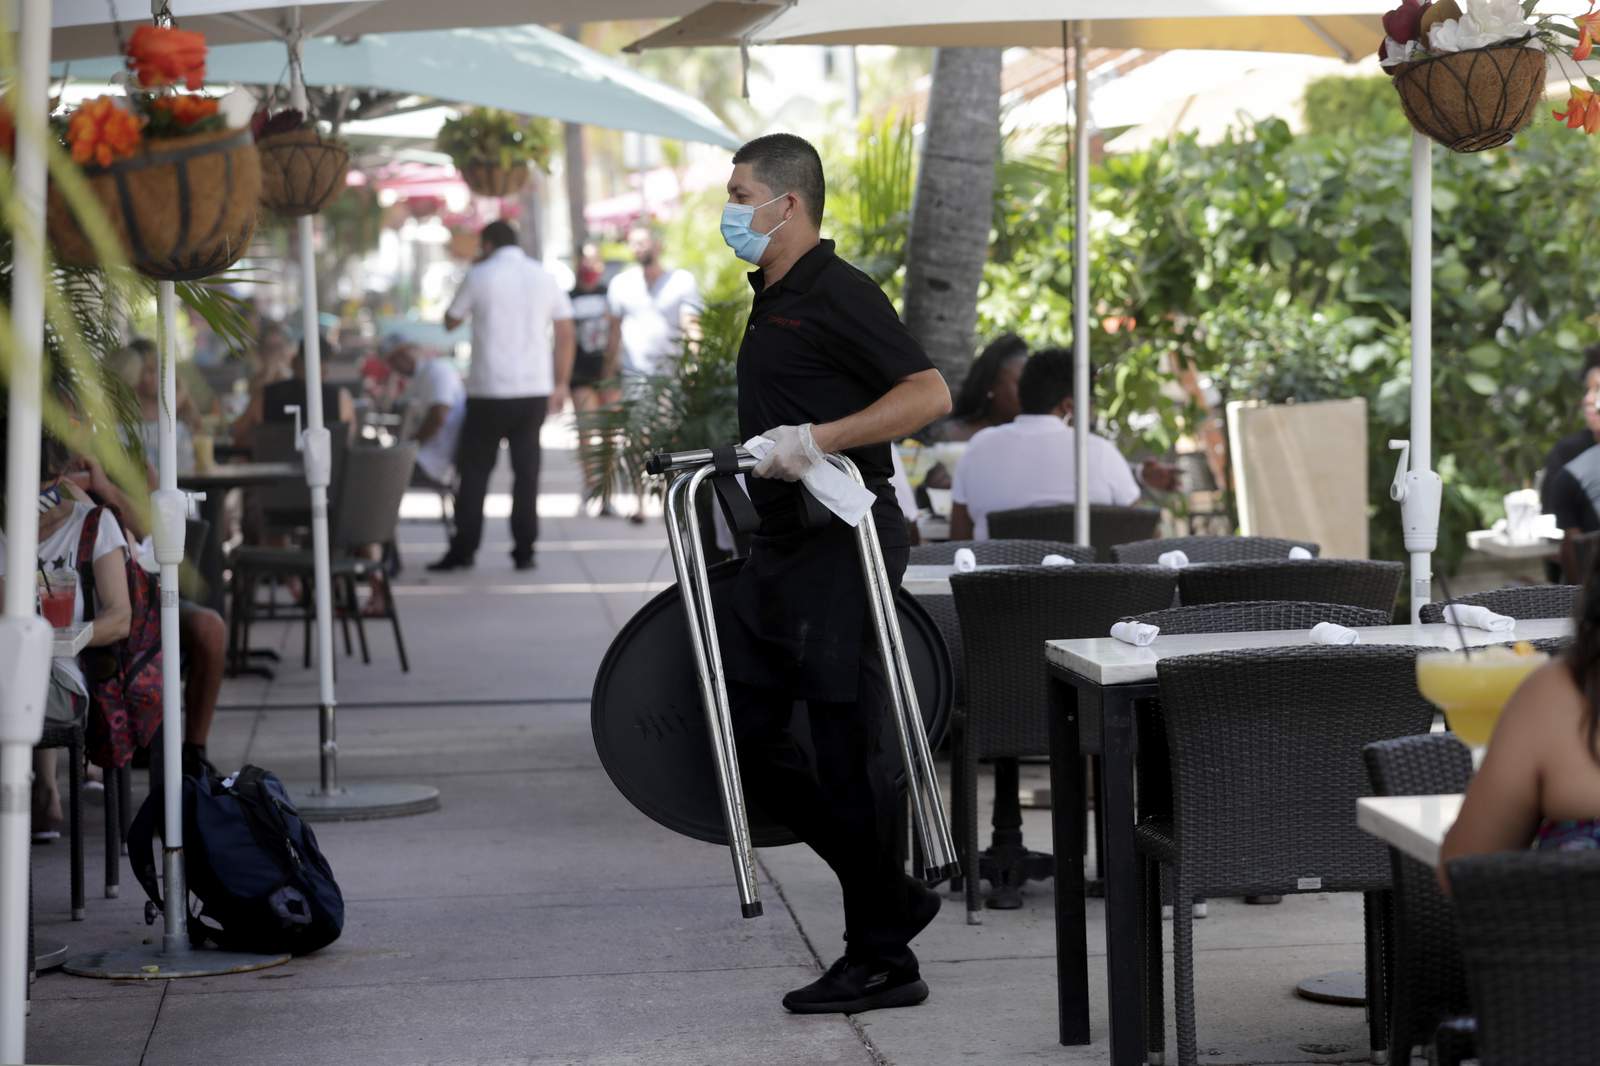 In Miami, outdoor facilities, including restaurants, will reopen Sunday